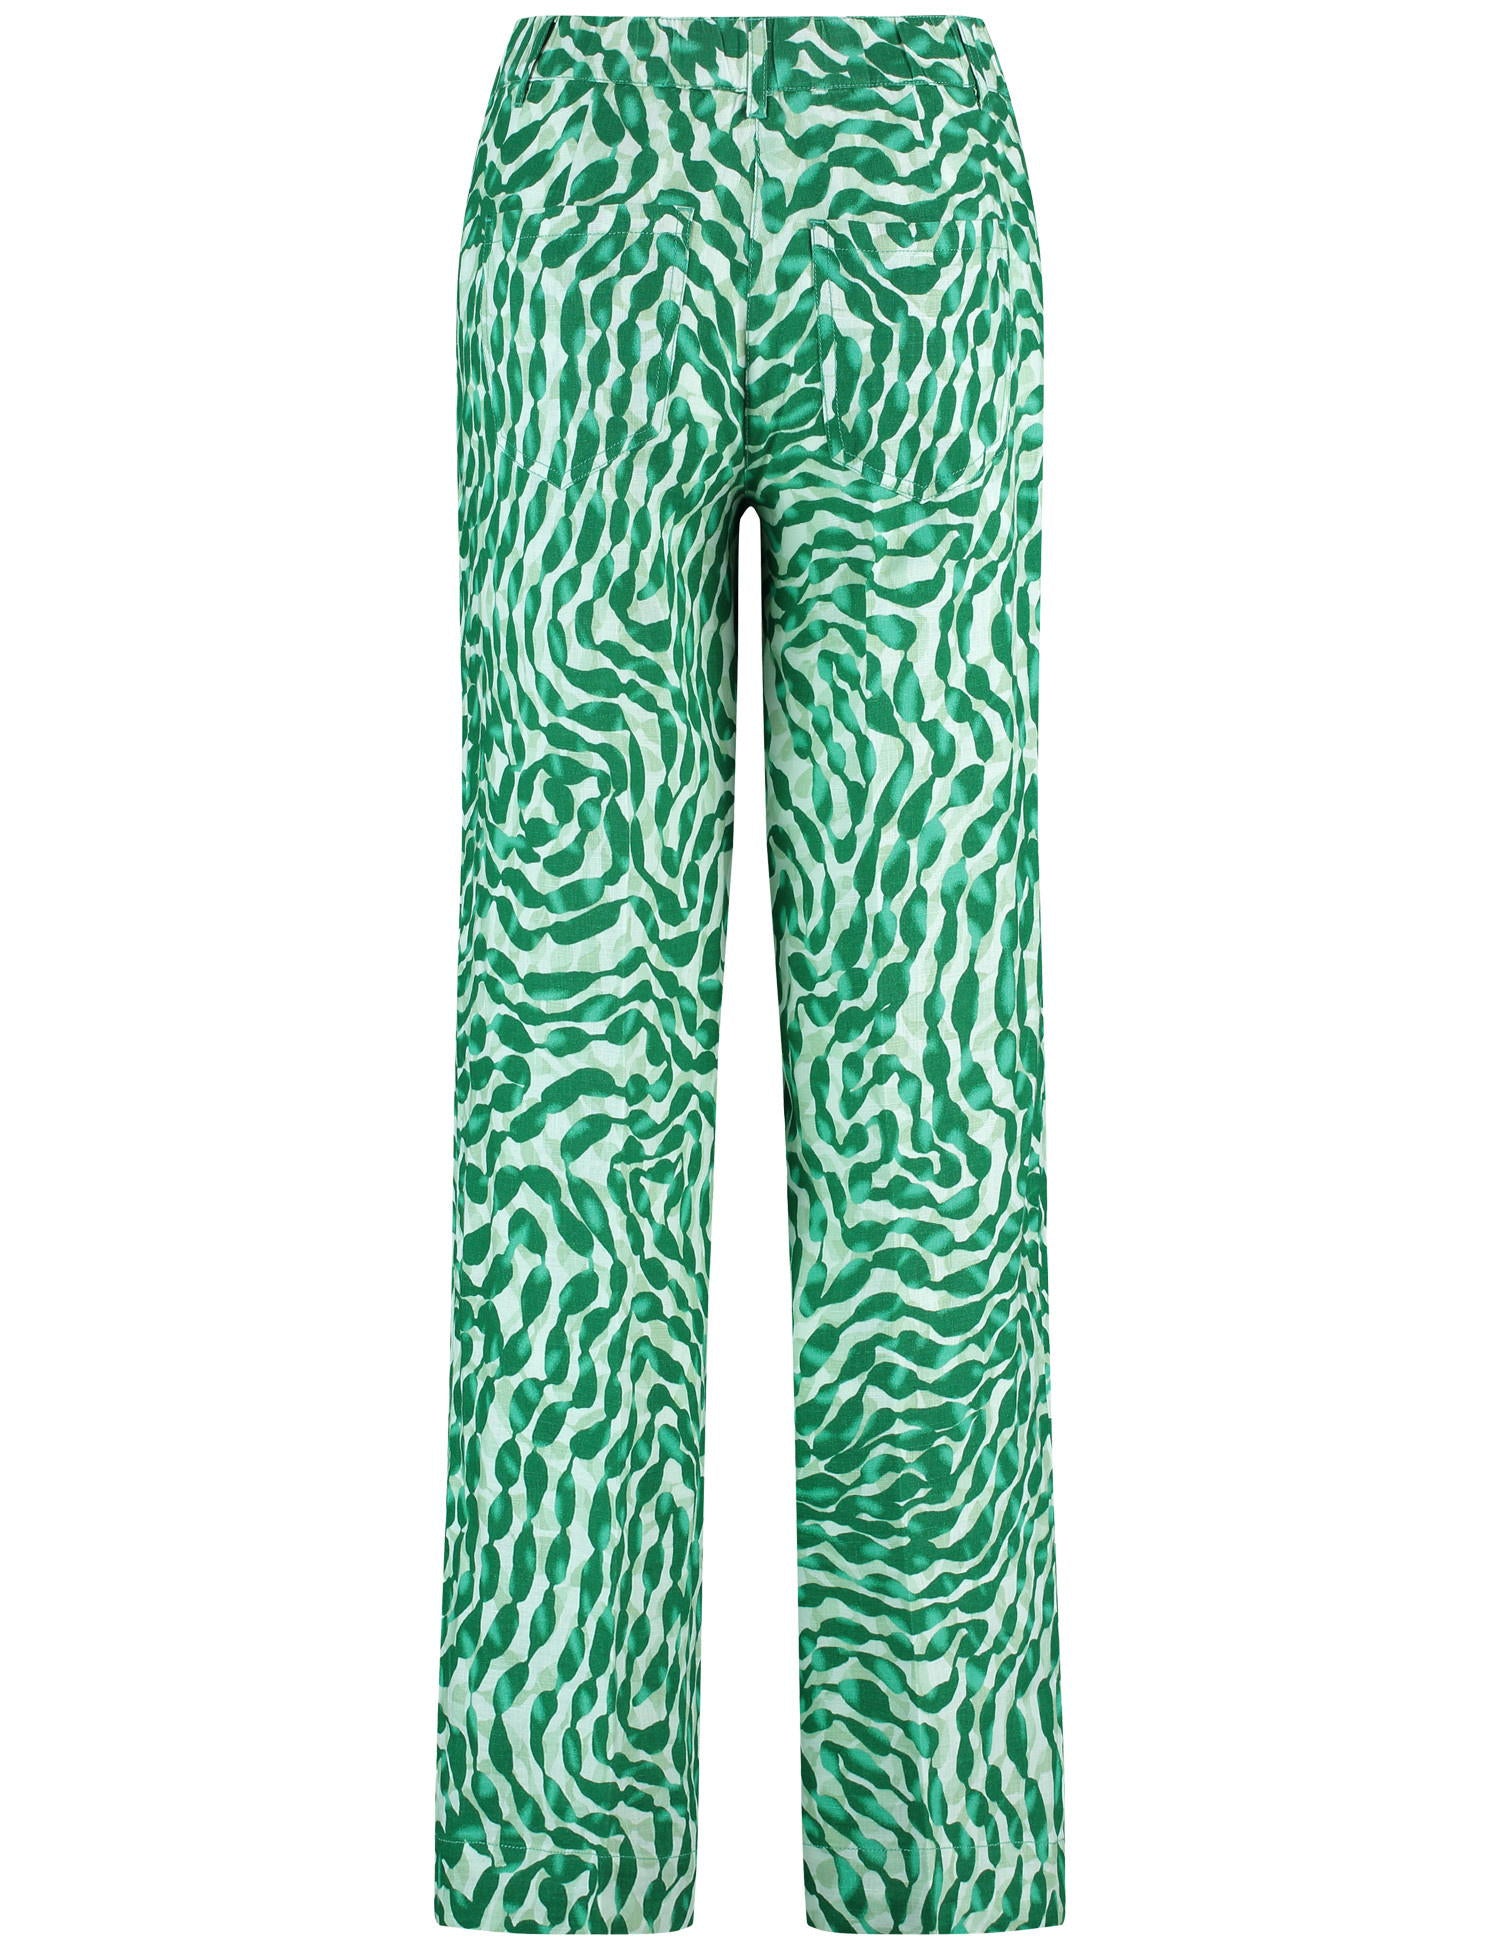 Patterned Linen Trousers With Pressed Pleats_222036-66224_5058_03